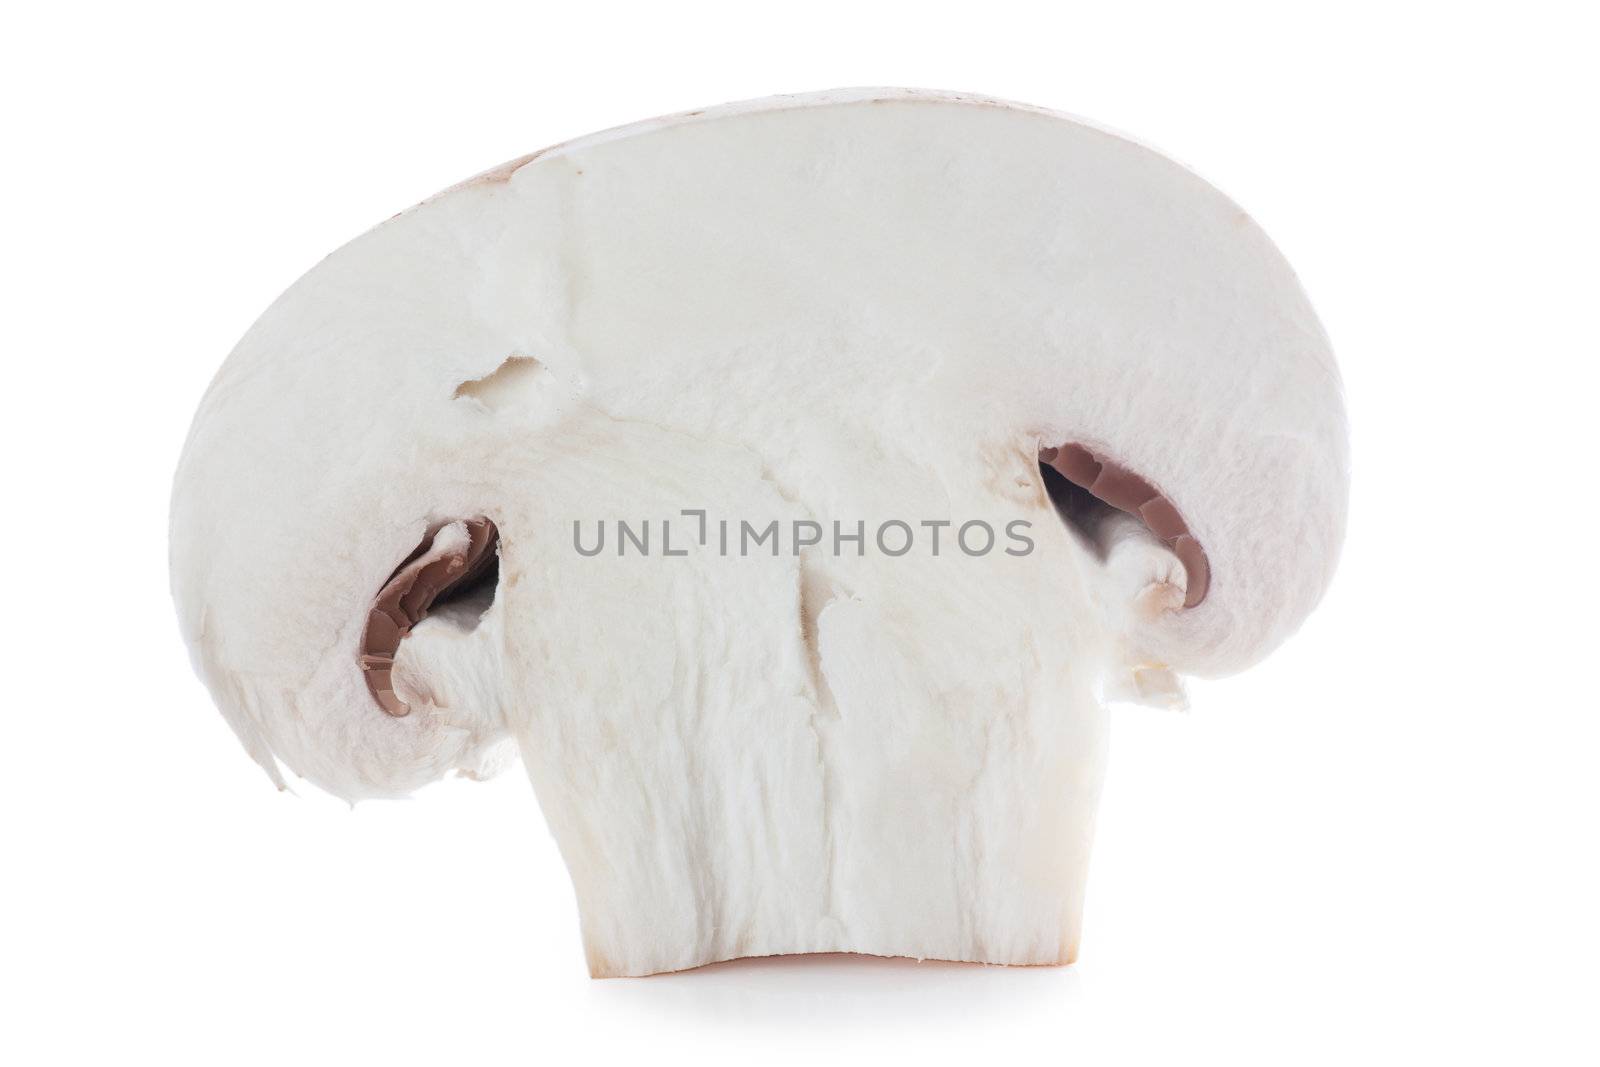 A section of mushroom isolated over white